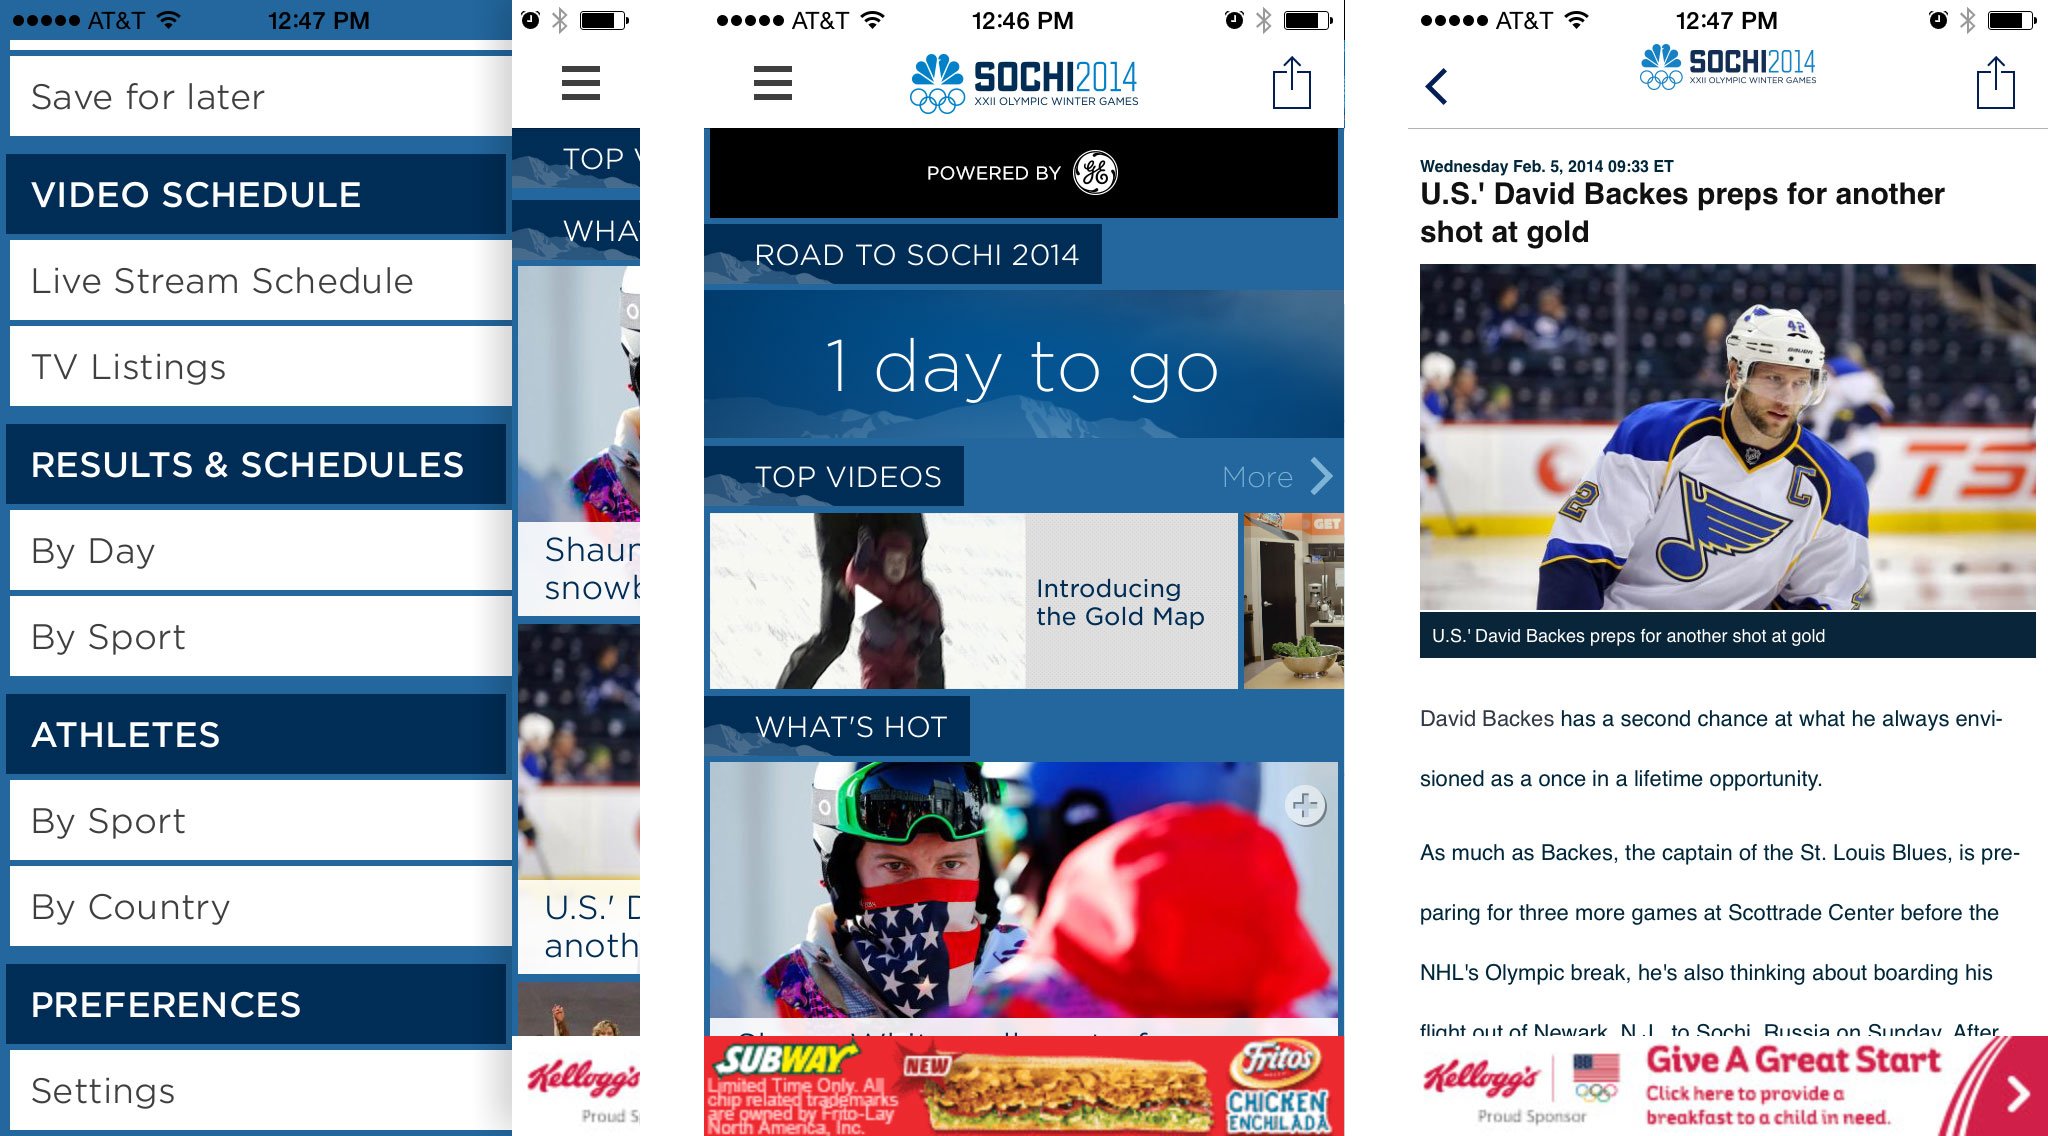 The best iPhone and iPad apps to keep up with the 2014 Winter Olympics in Sochi